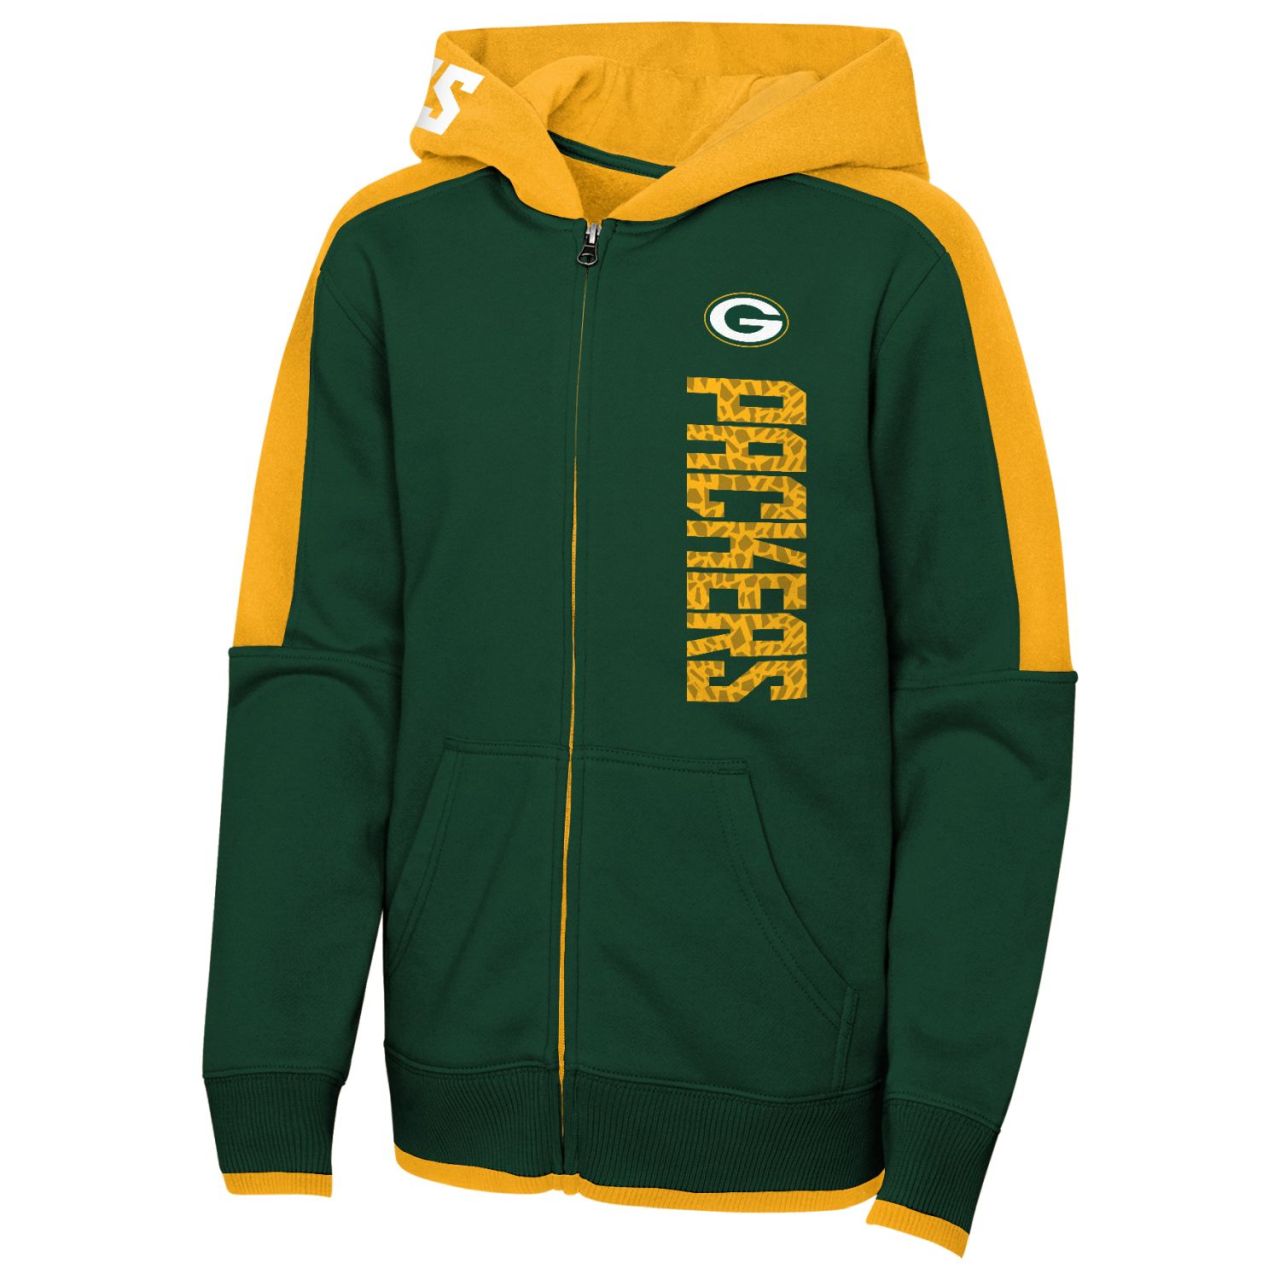 NFL Kinder Hoody - POST UP Green Bay Packers von Outerstuff